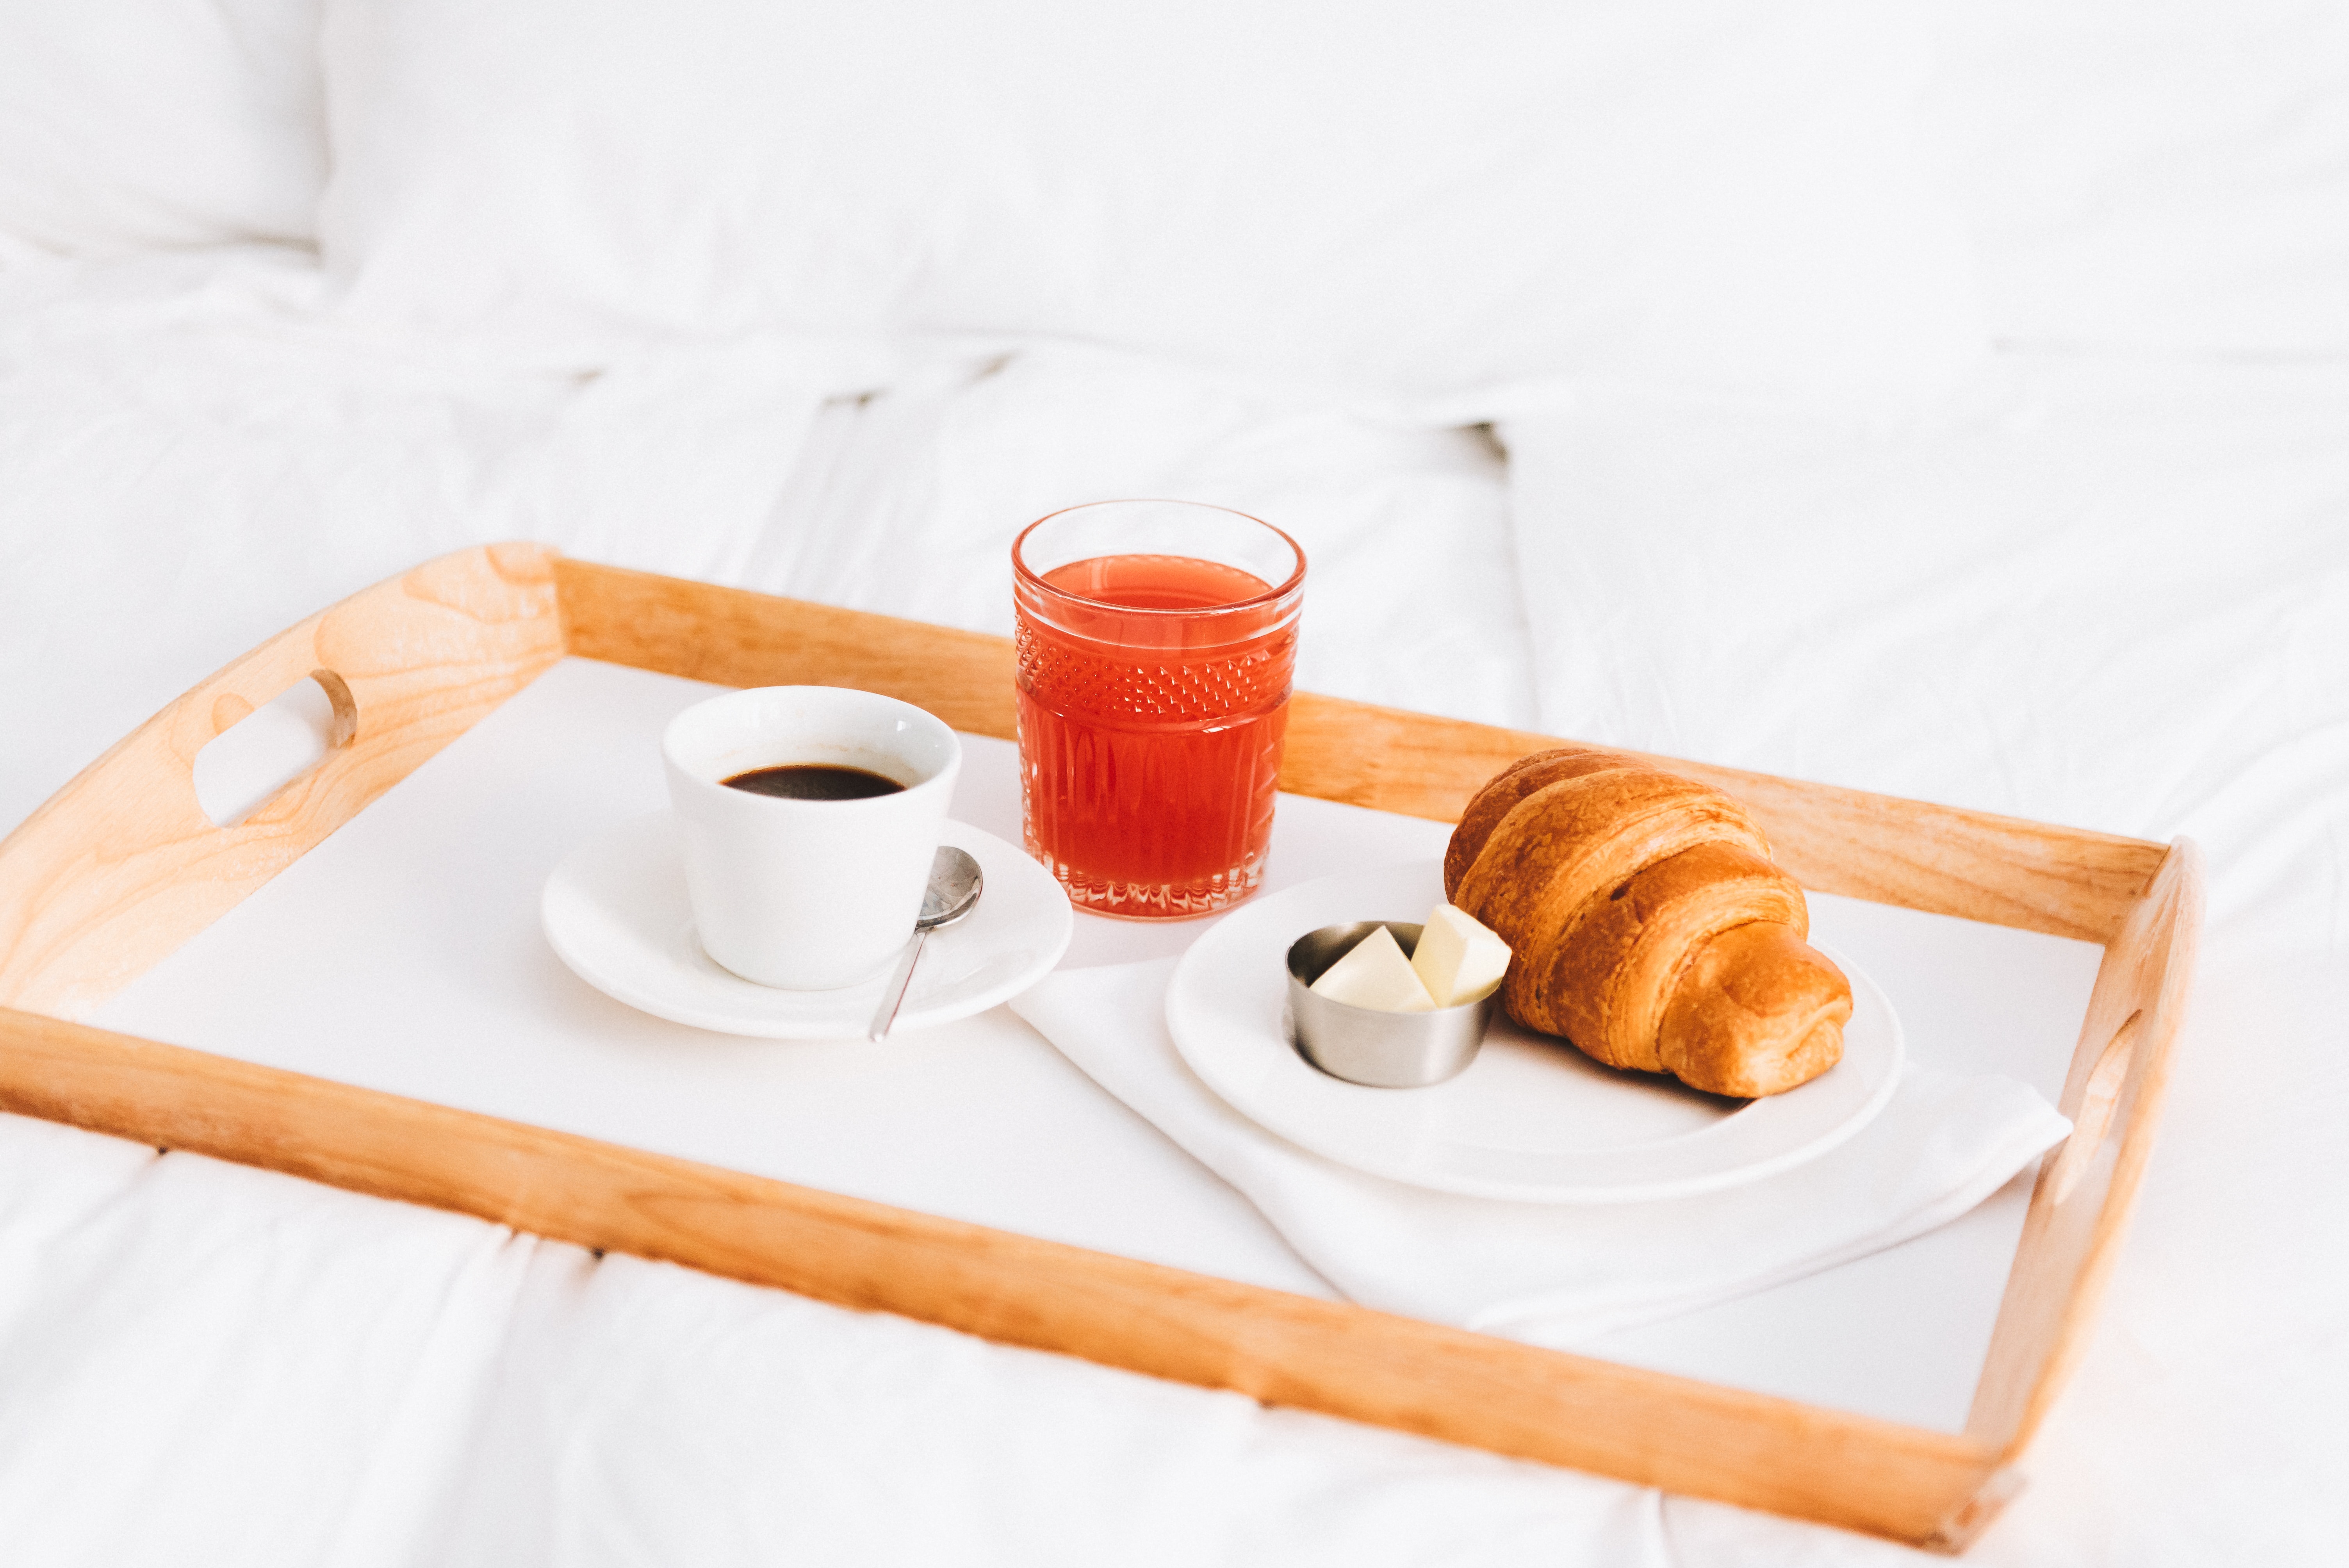 Perfect delicious breakfast of croissant with butter, coffee and grapefruit fresh juice 